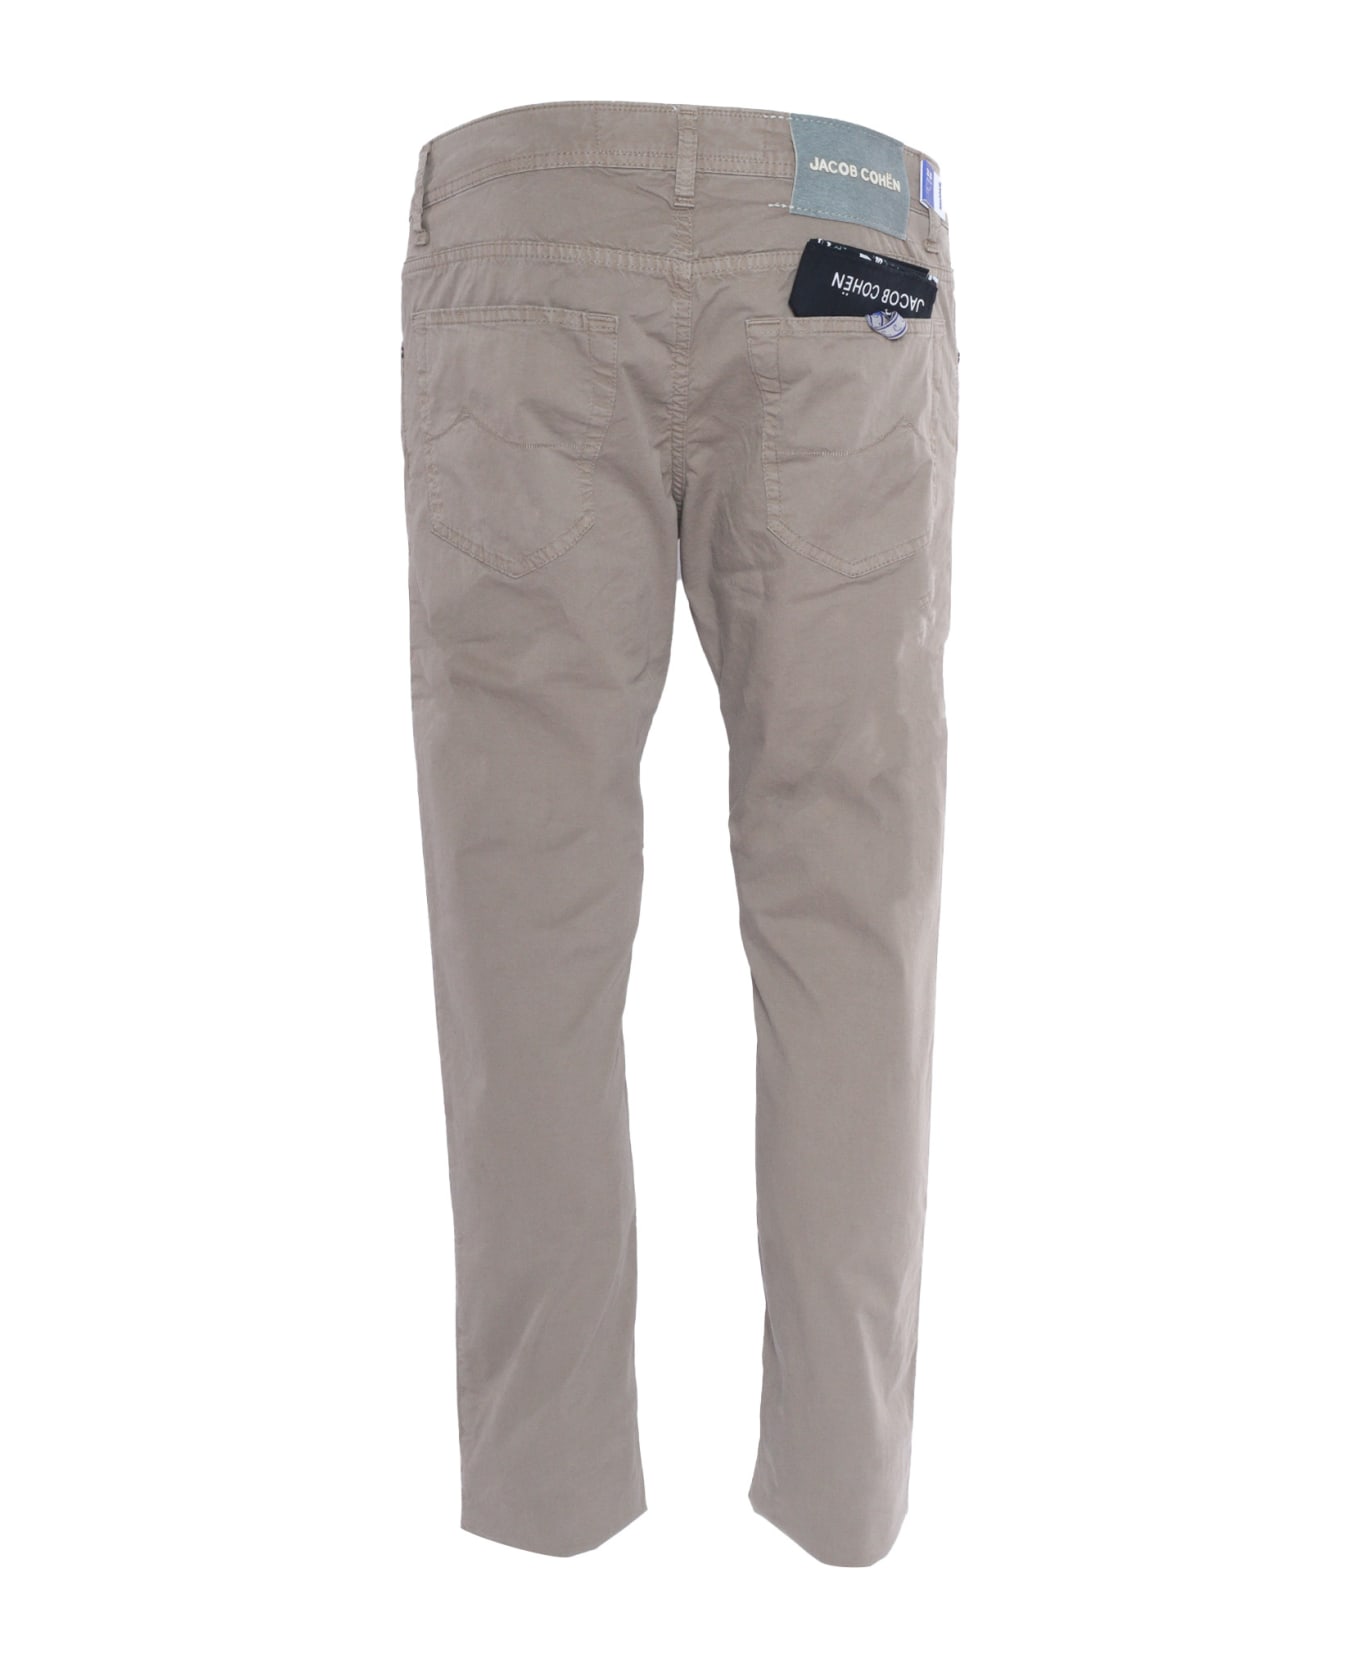 Jacob Cohen Brown 5 Pocket Trousers - BROWN ボトムス